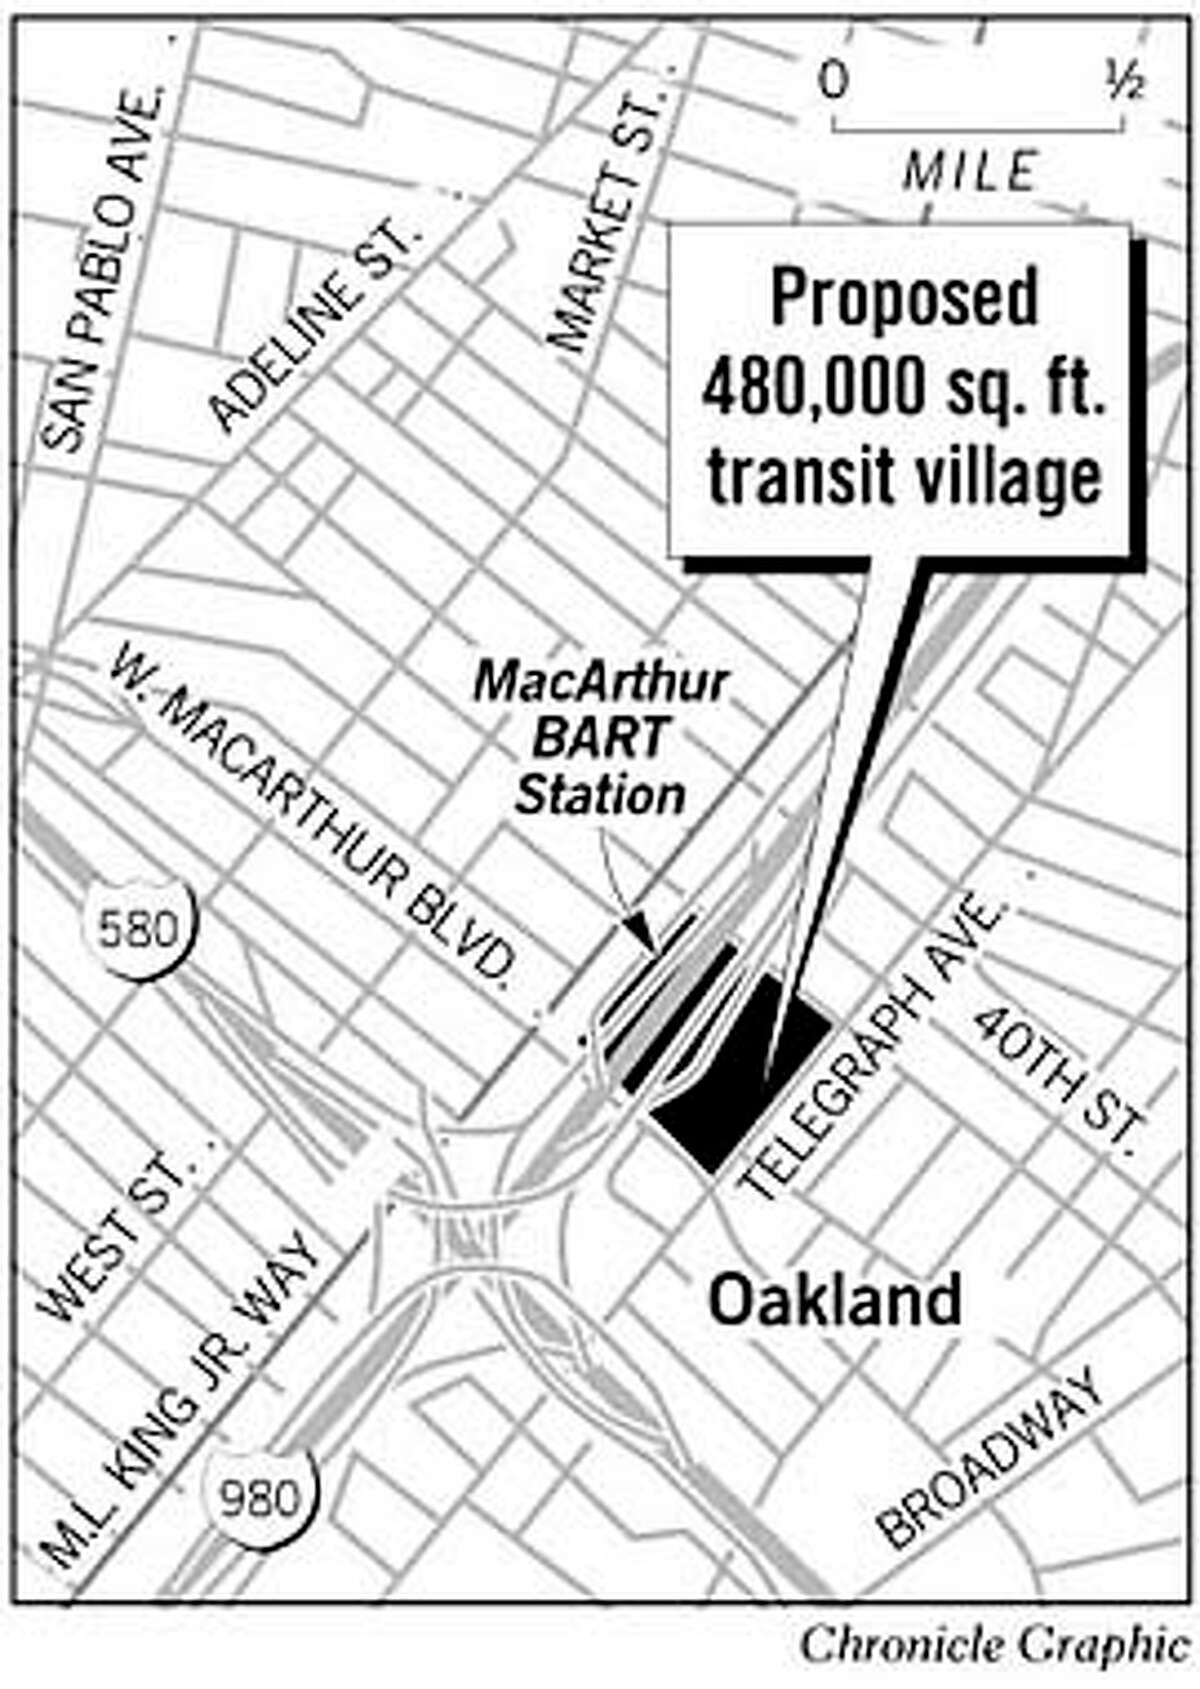 BART's Proposed 'Transit Village.' Chronicle Graphic